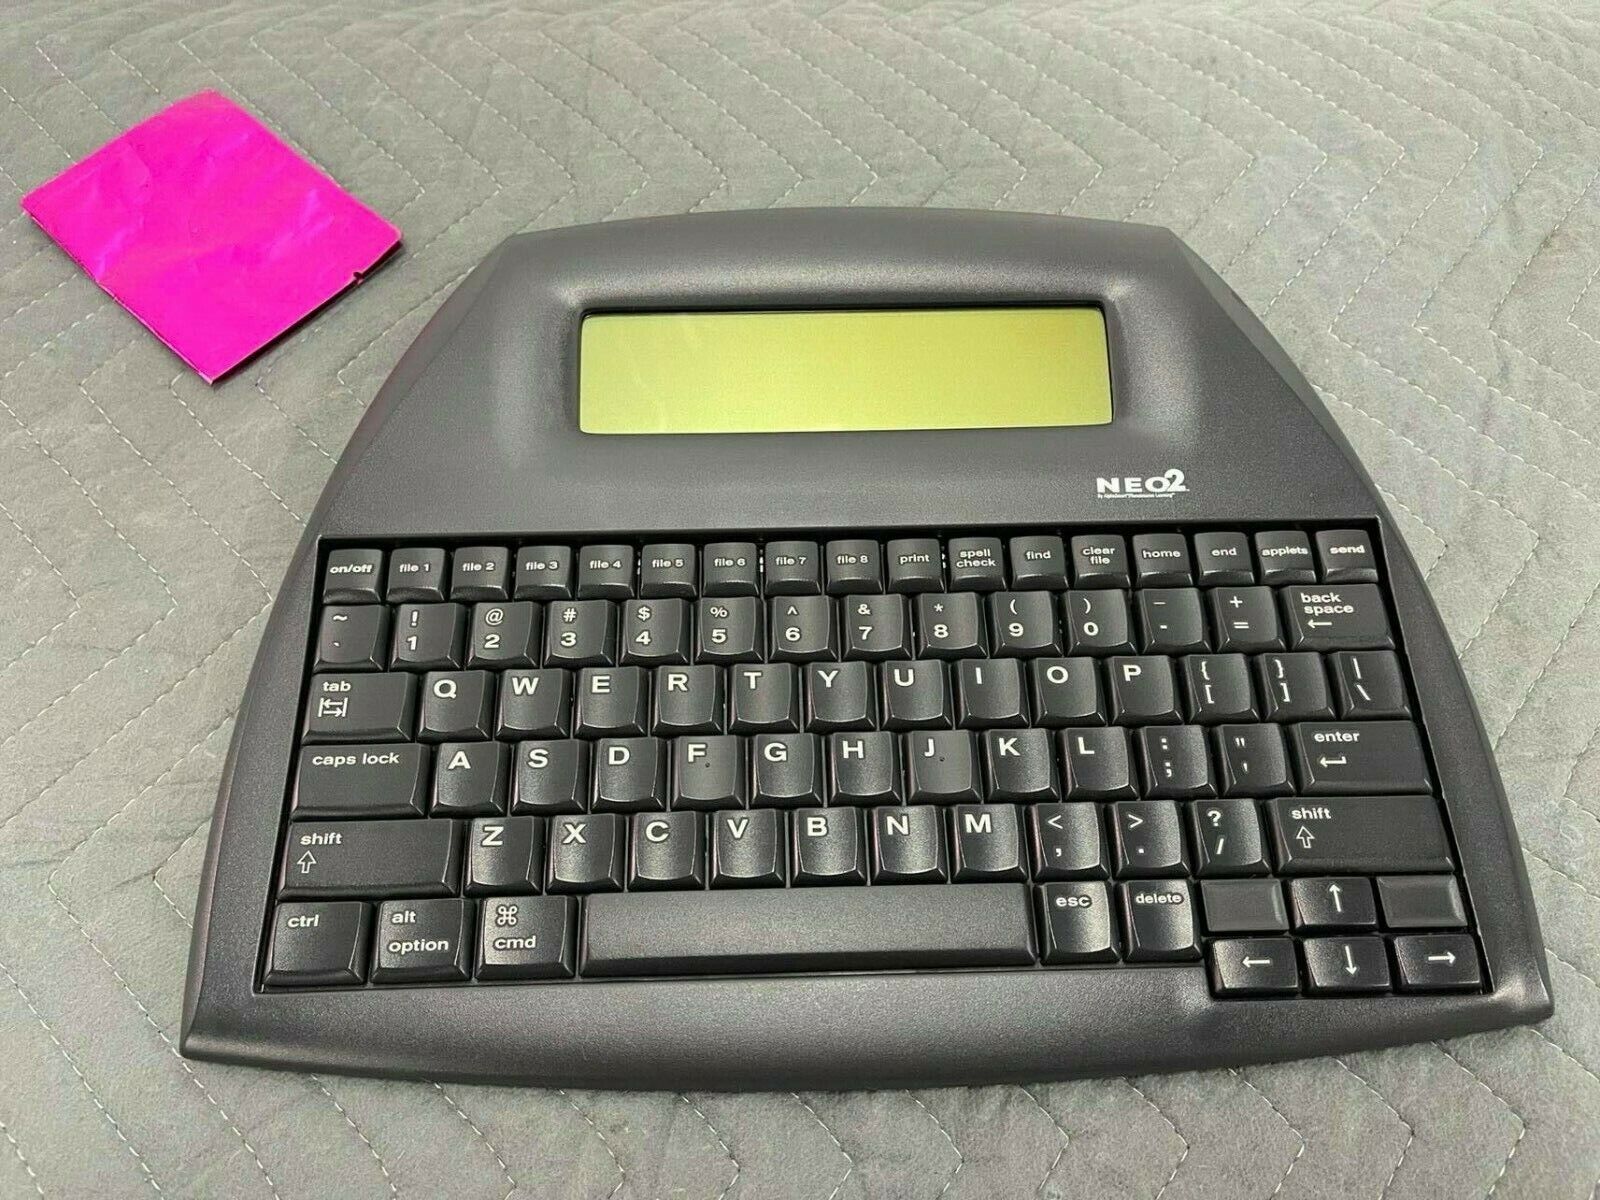 AlphaSmart NEO2 Portable Word Processor w/ USB Printer Cable - New without box